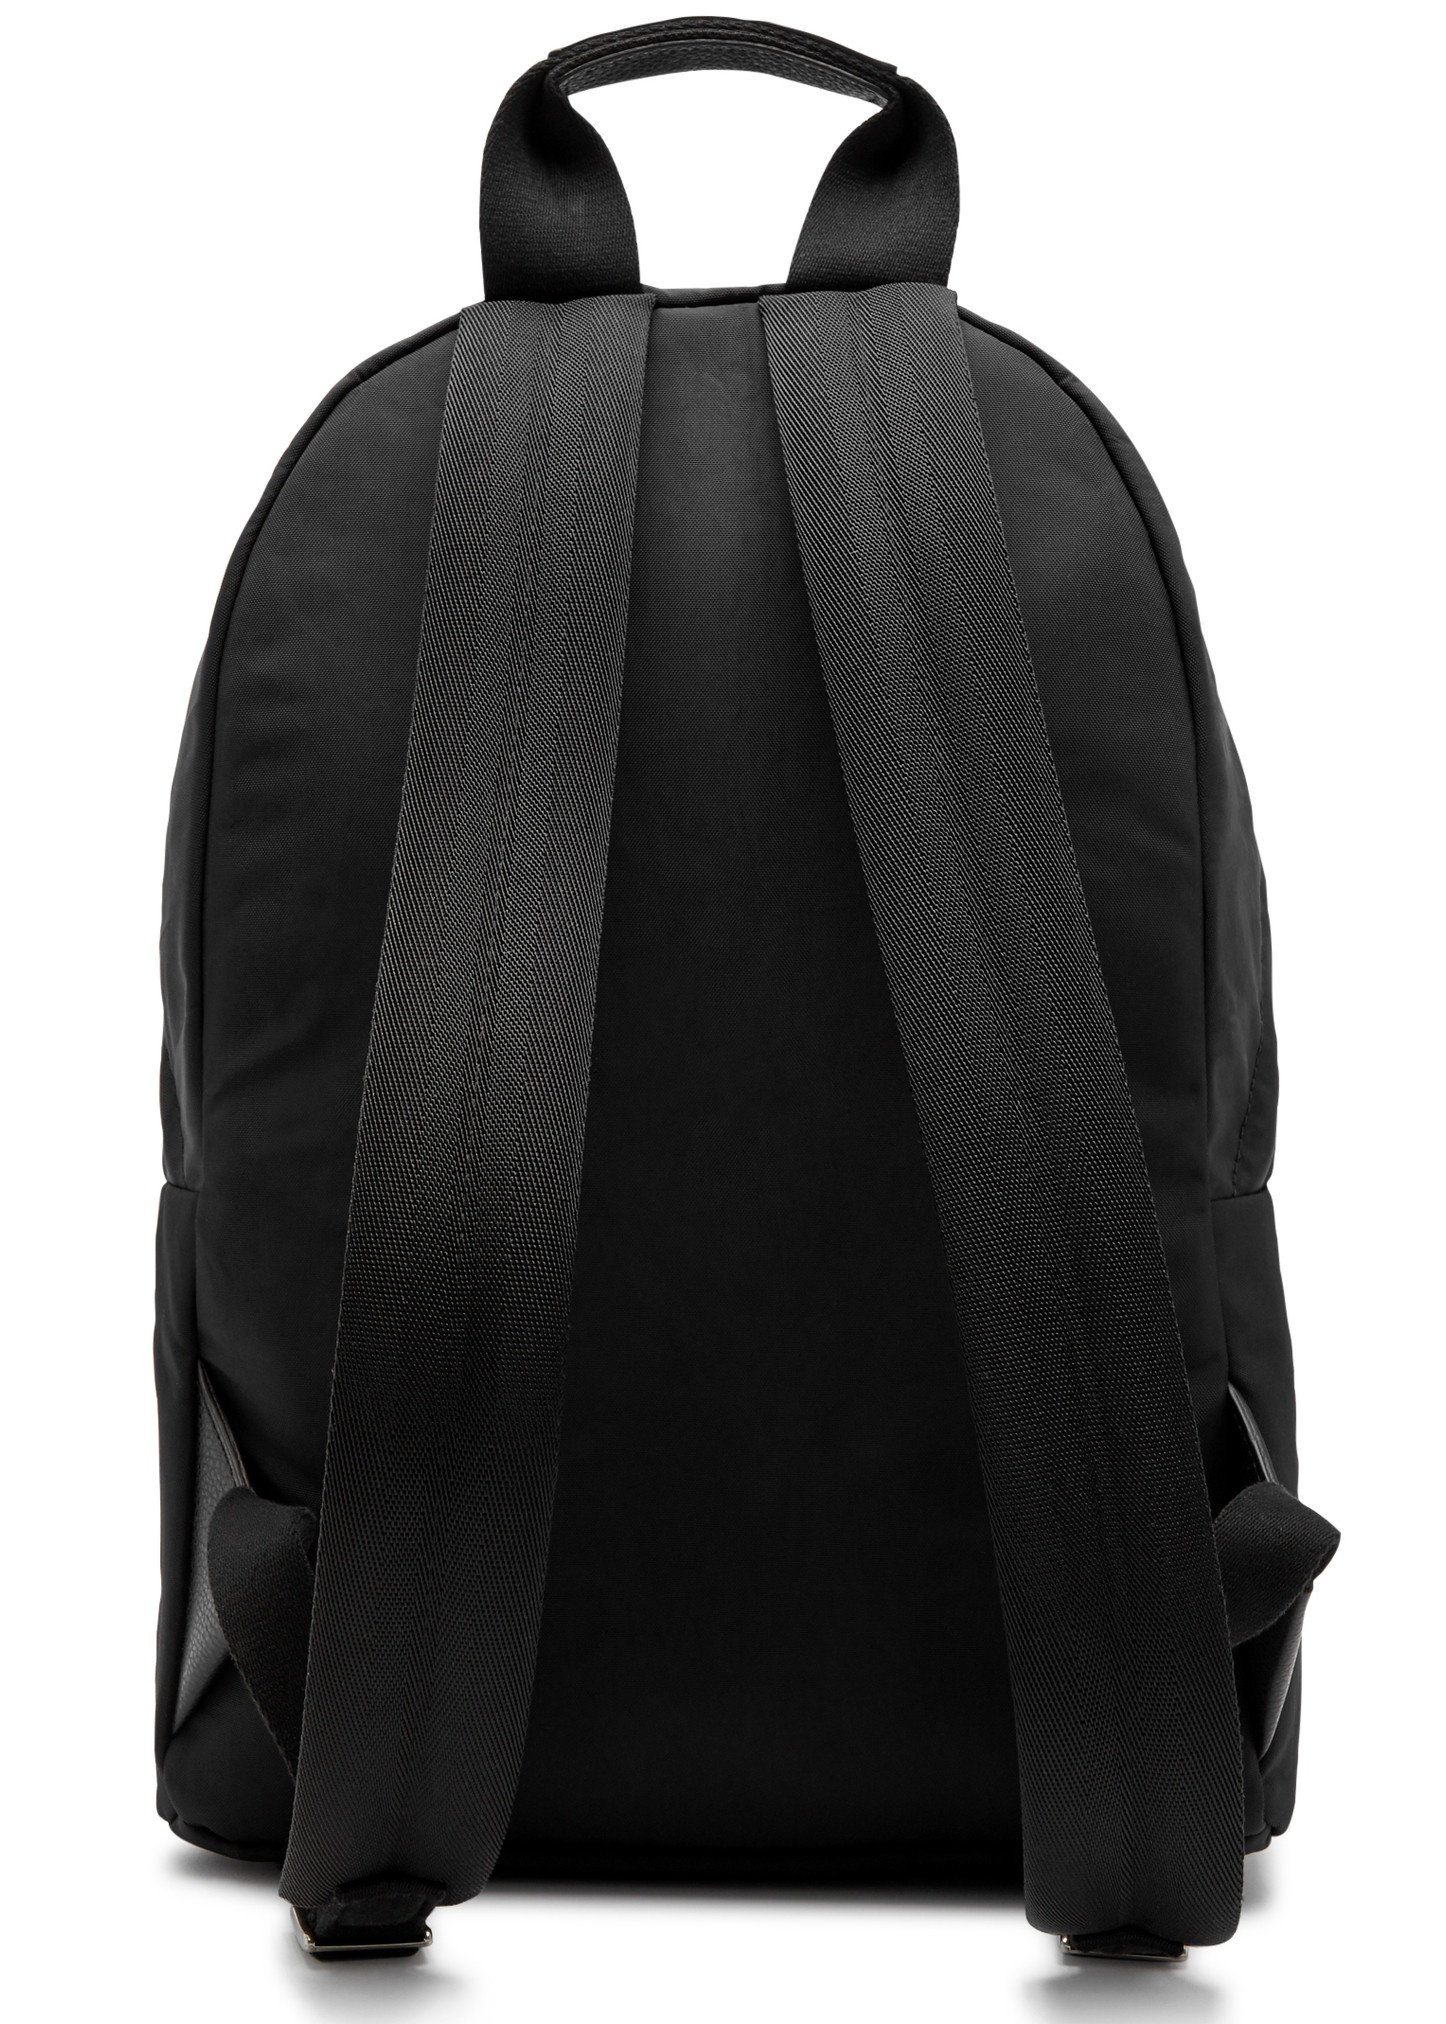 Canvas backpack - 2